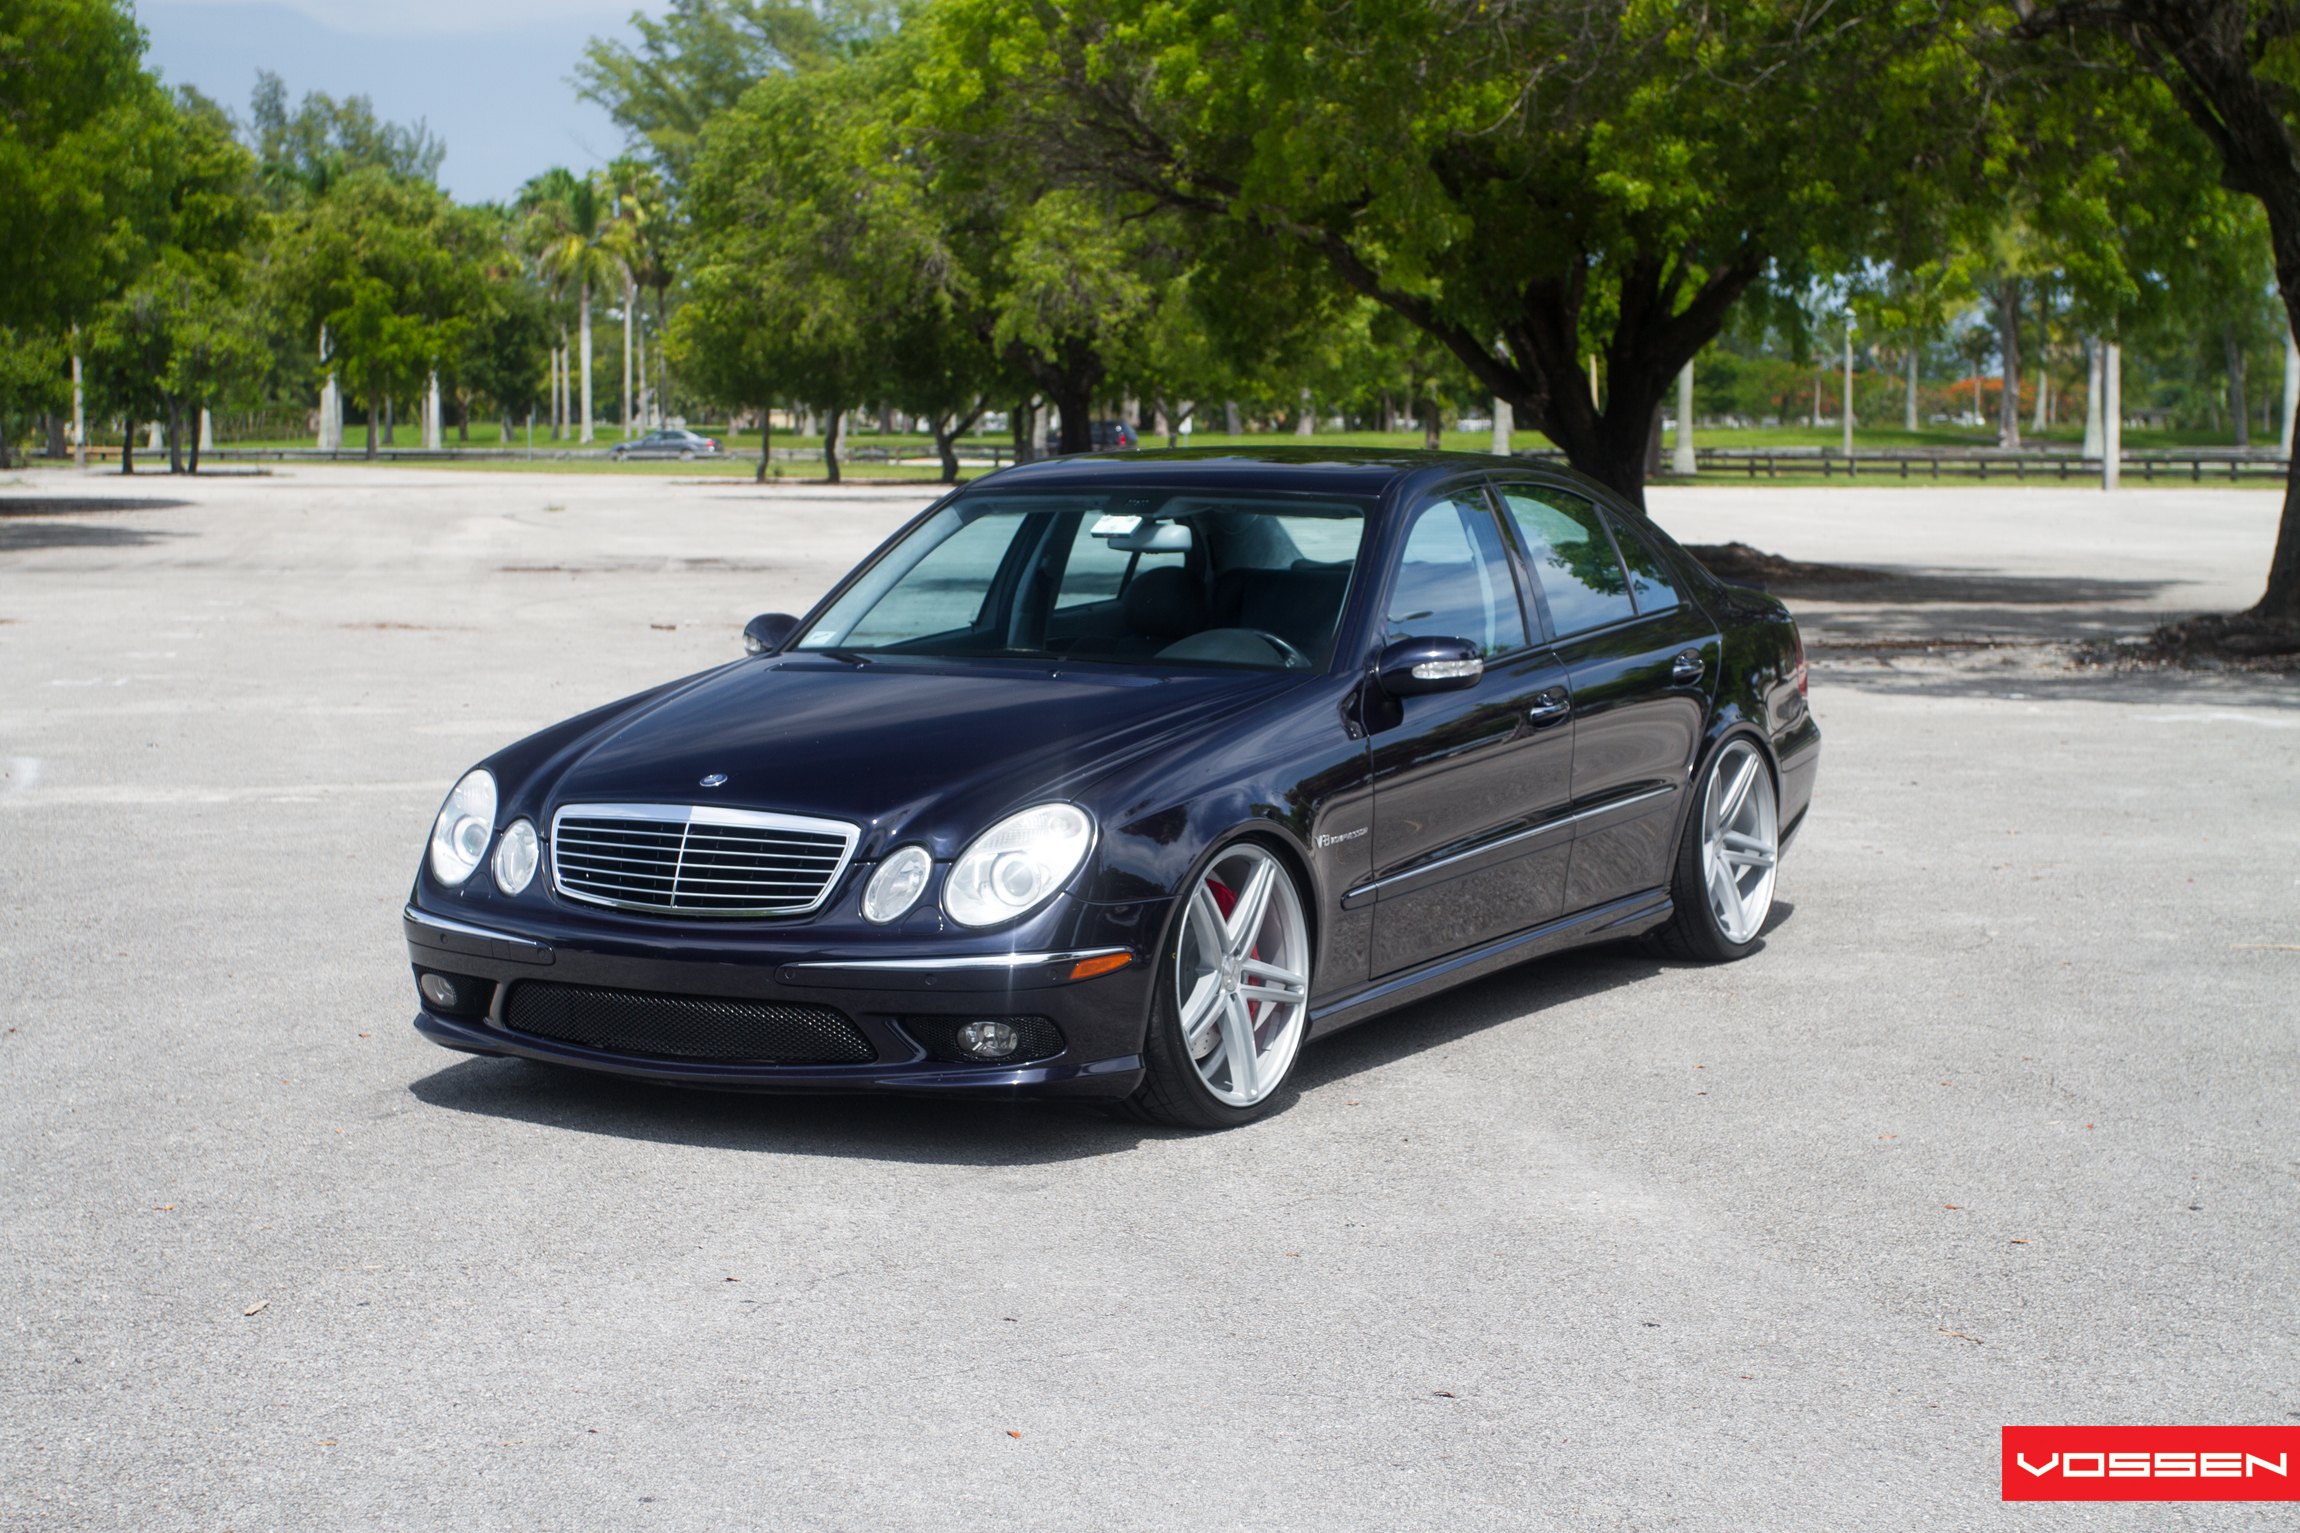 Black Mercedes E Class with Chrome Billet Grille - Photo by Vossen